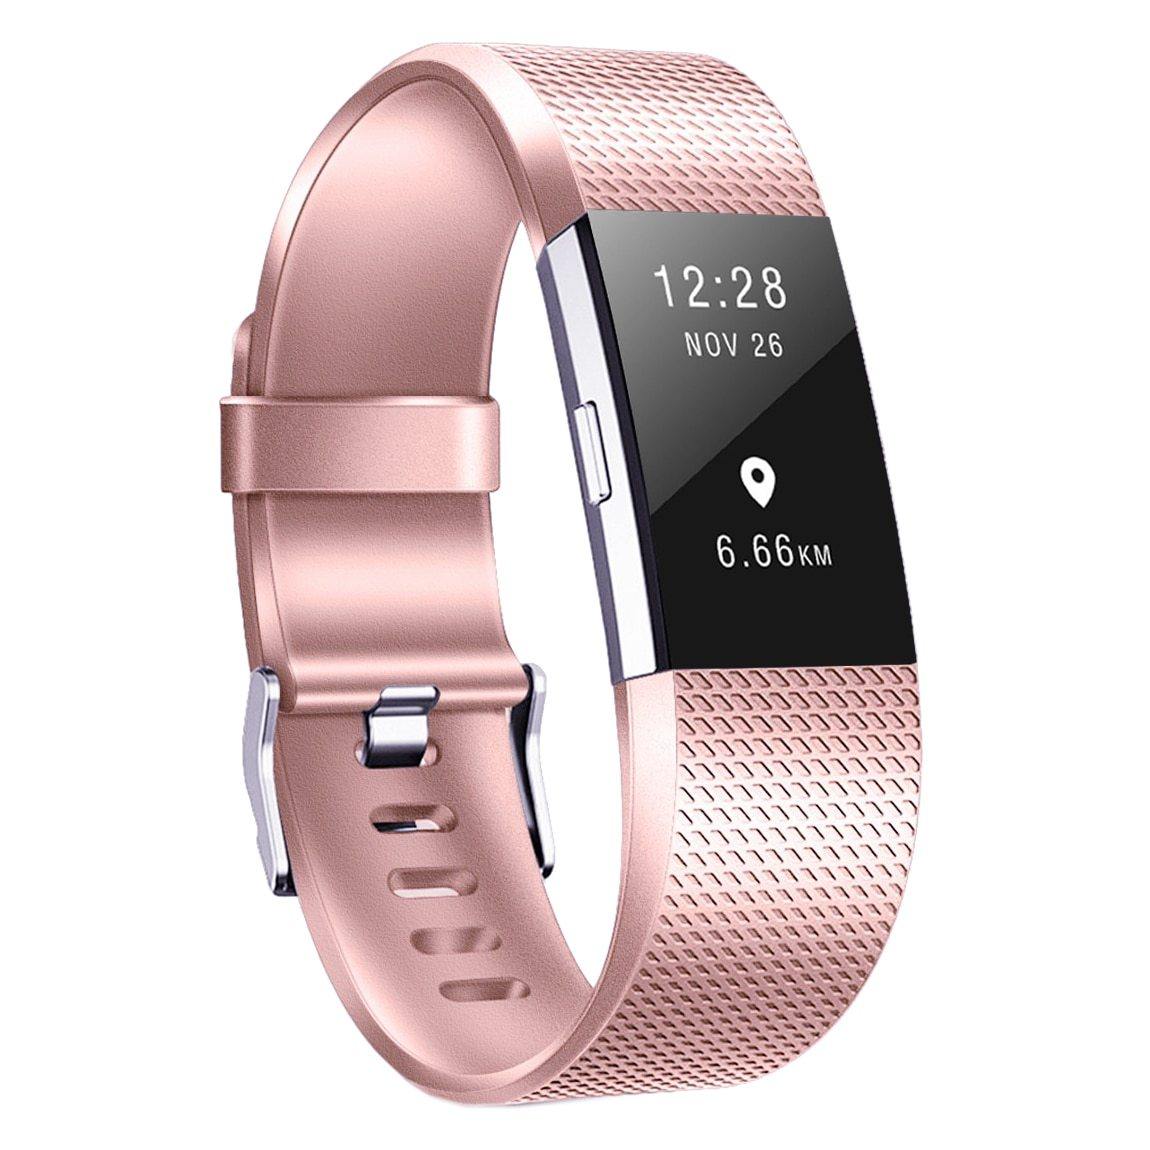 Design Replacement Bands for Fitbit Charge 2 - watchband.direct